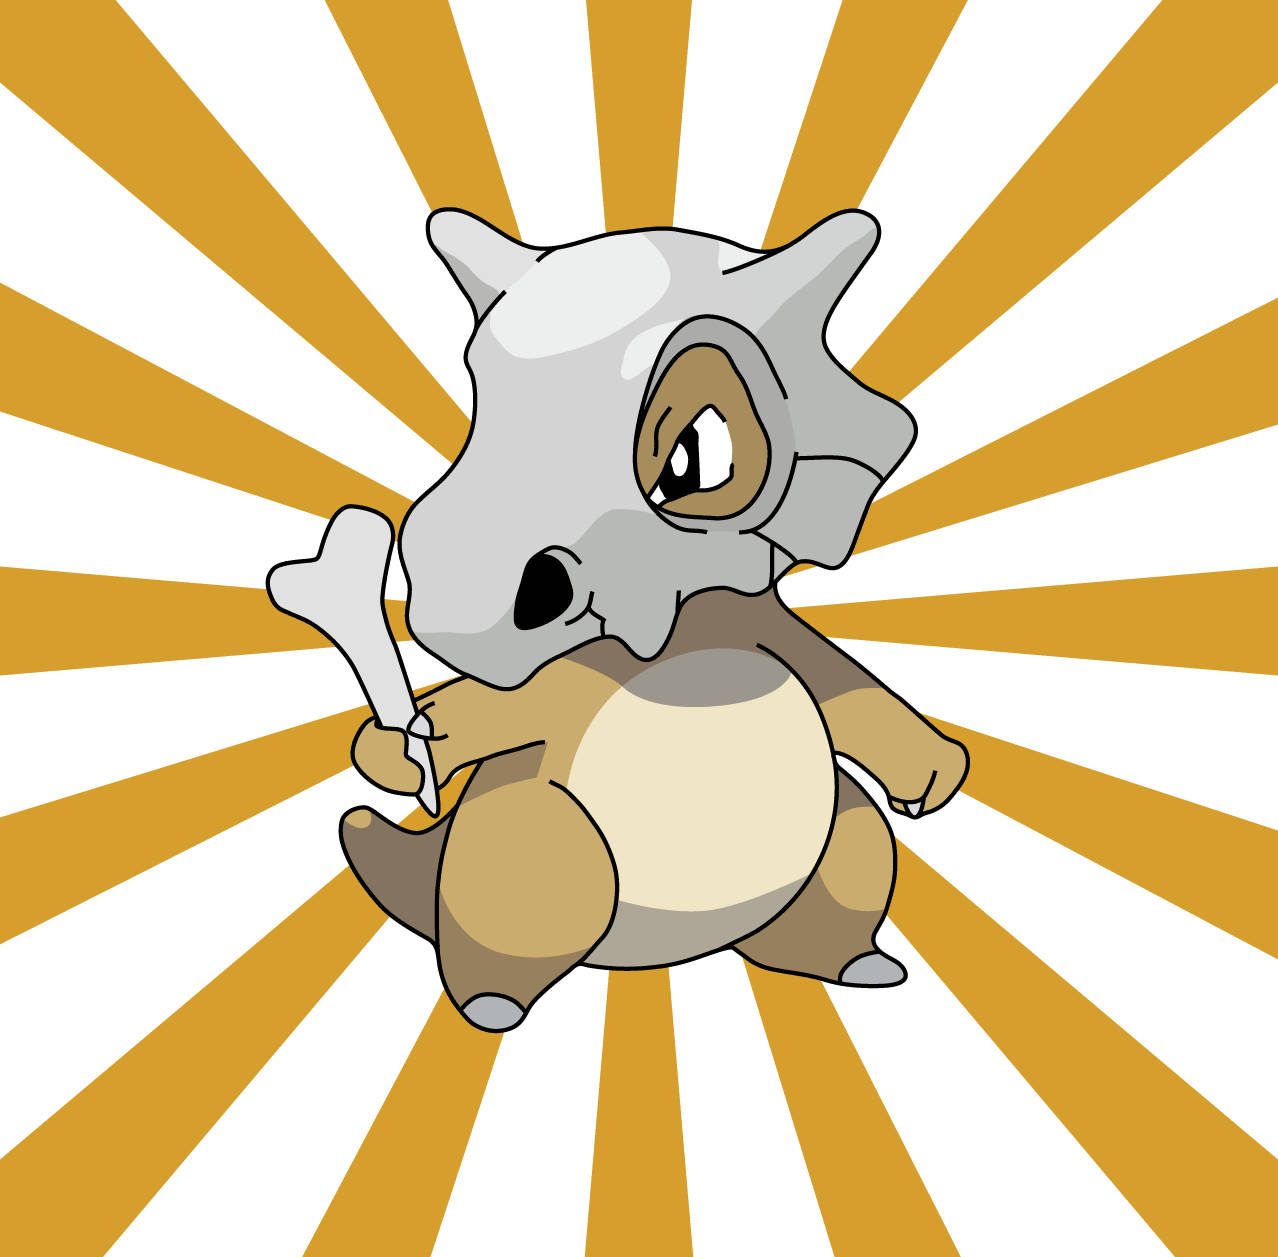 Pokemoncubone Is A Little Monster That Resembles A Dinosaur. It Is Known For Wearing The Skull Of Its Deceased Mother On Its Head, Which Serves As A Helmet. Cubone Is A Ground-type Pokémon And Is Often Depicted As A Lonely And Sorrowful Creature. It Has An Affinity For The Moon, And It Is Said That Its Cries Echo A Sad Melody Under A Full Moon. Despite Its Tragic Backstory, Cubone Can Evolve Into The Powerful Marowak With The Right Training And Experience. It Is A Popular Choice For Trainers Looking For A Unique And Intriguing Pokémon Partner. Fondo de pantalla